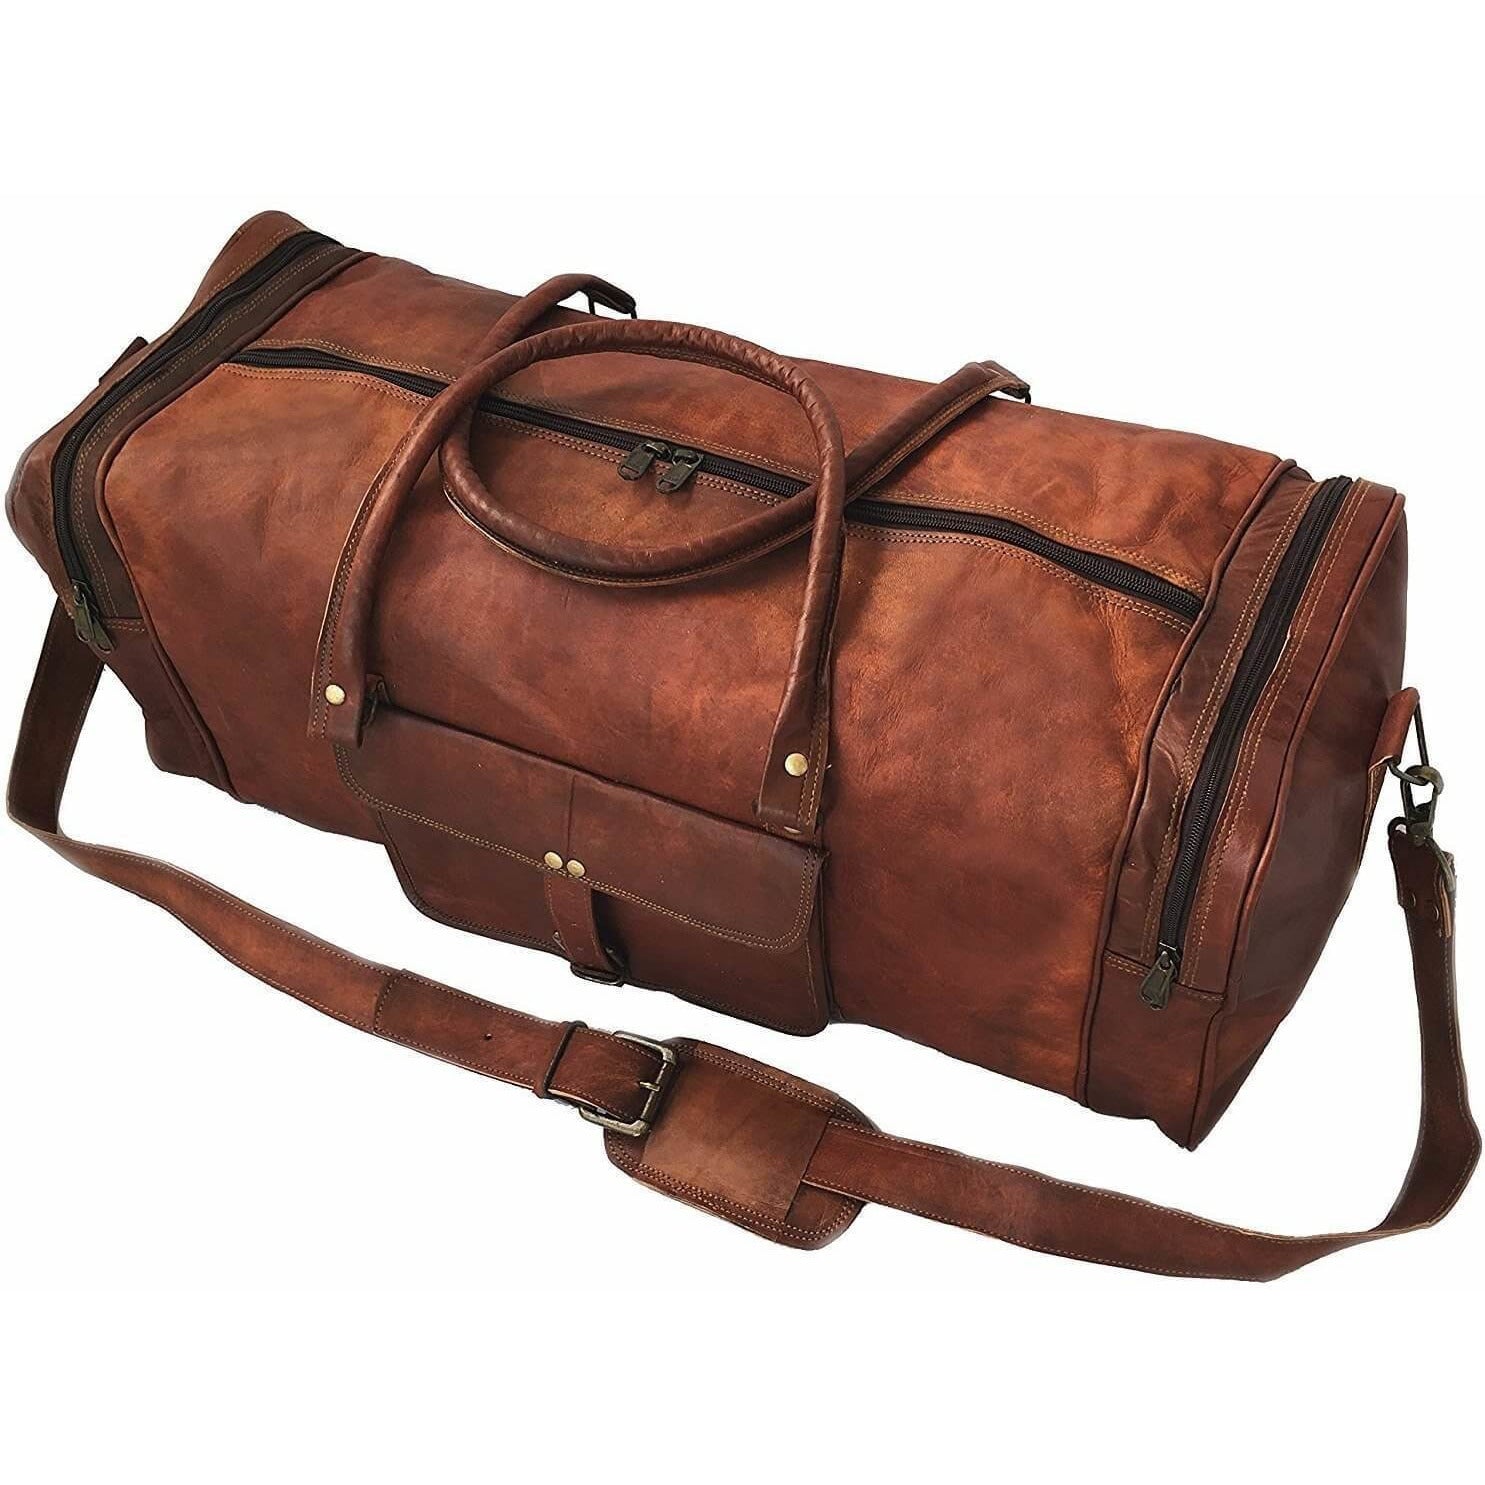 Casual Vintage Leather Duffle Bag | Leather Bags Gallery